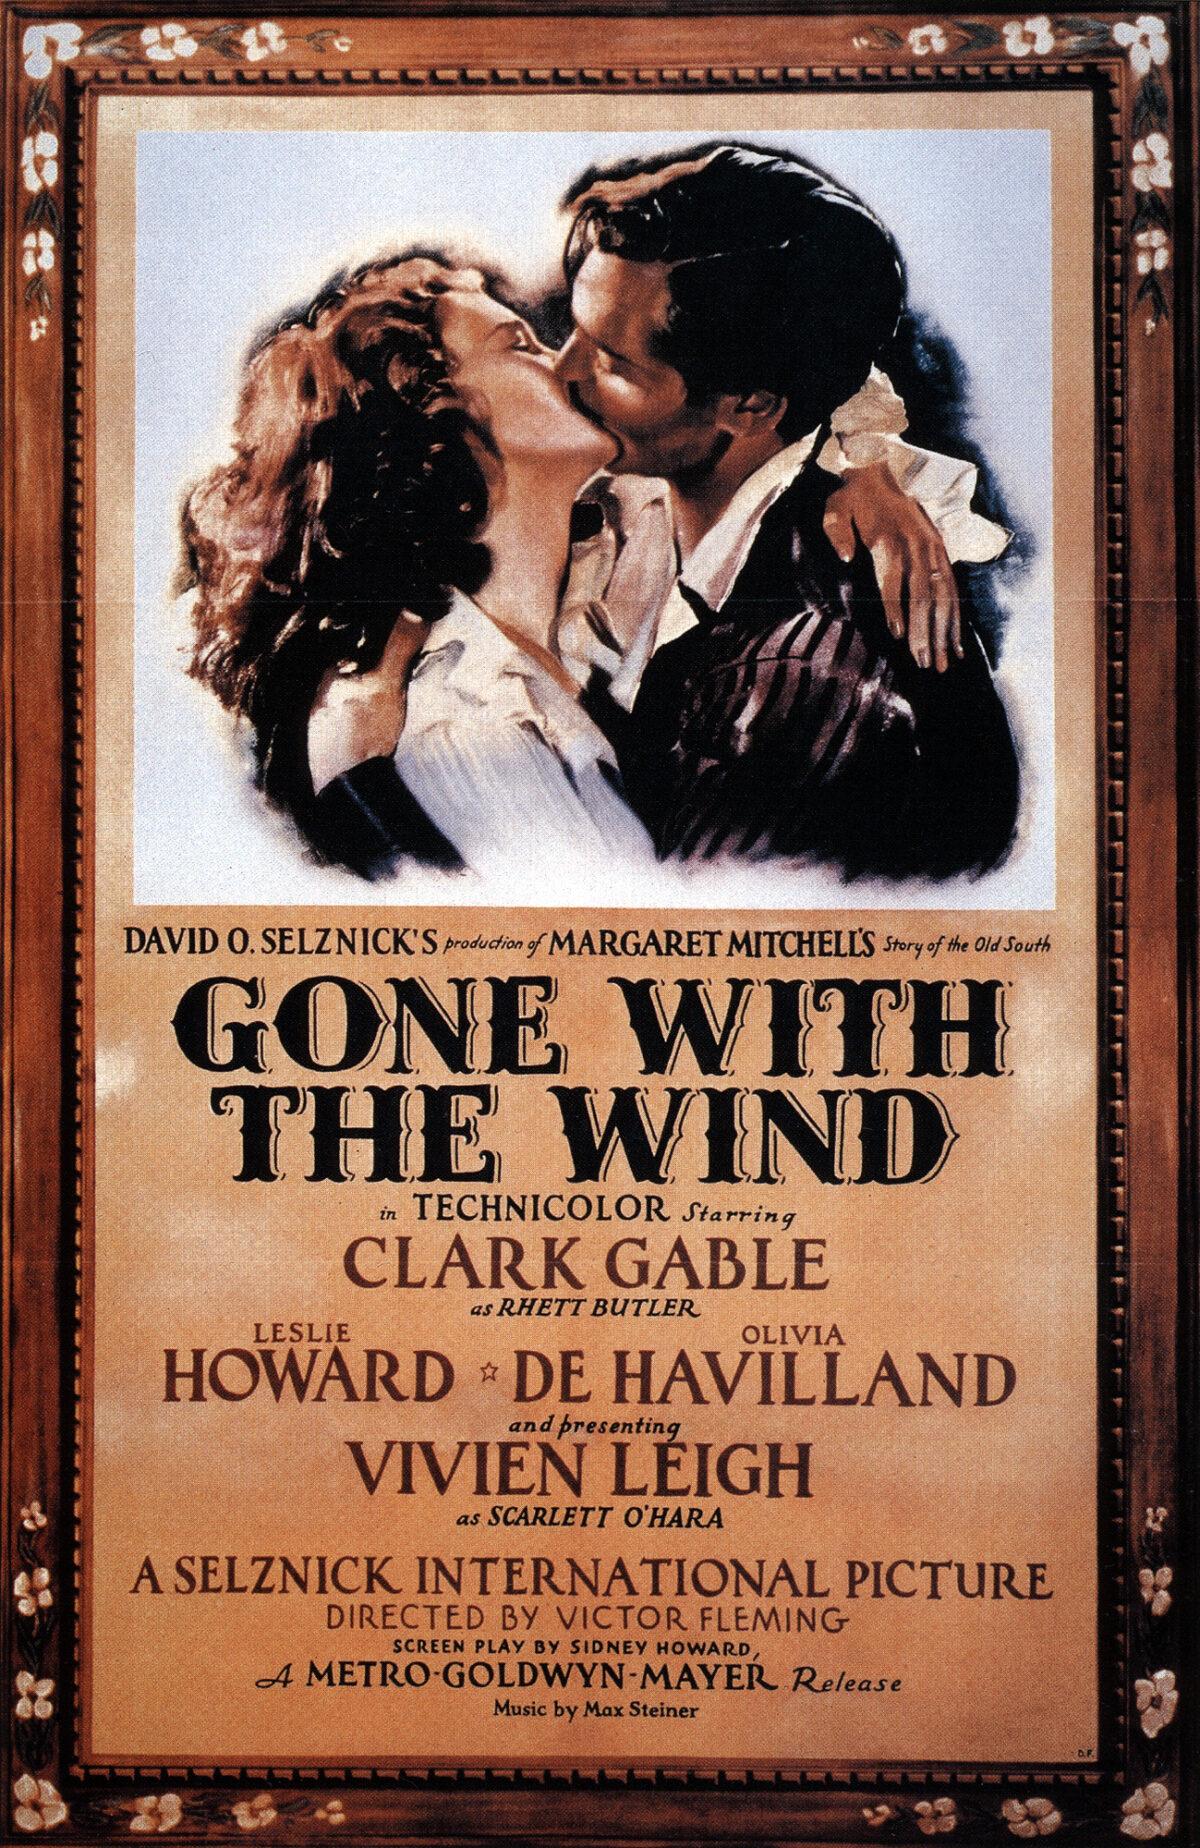 Film poster for the 1939 film "Gone with the Wind." (Public Domain)